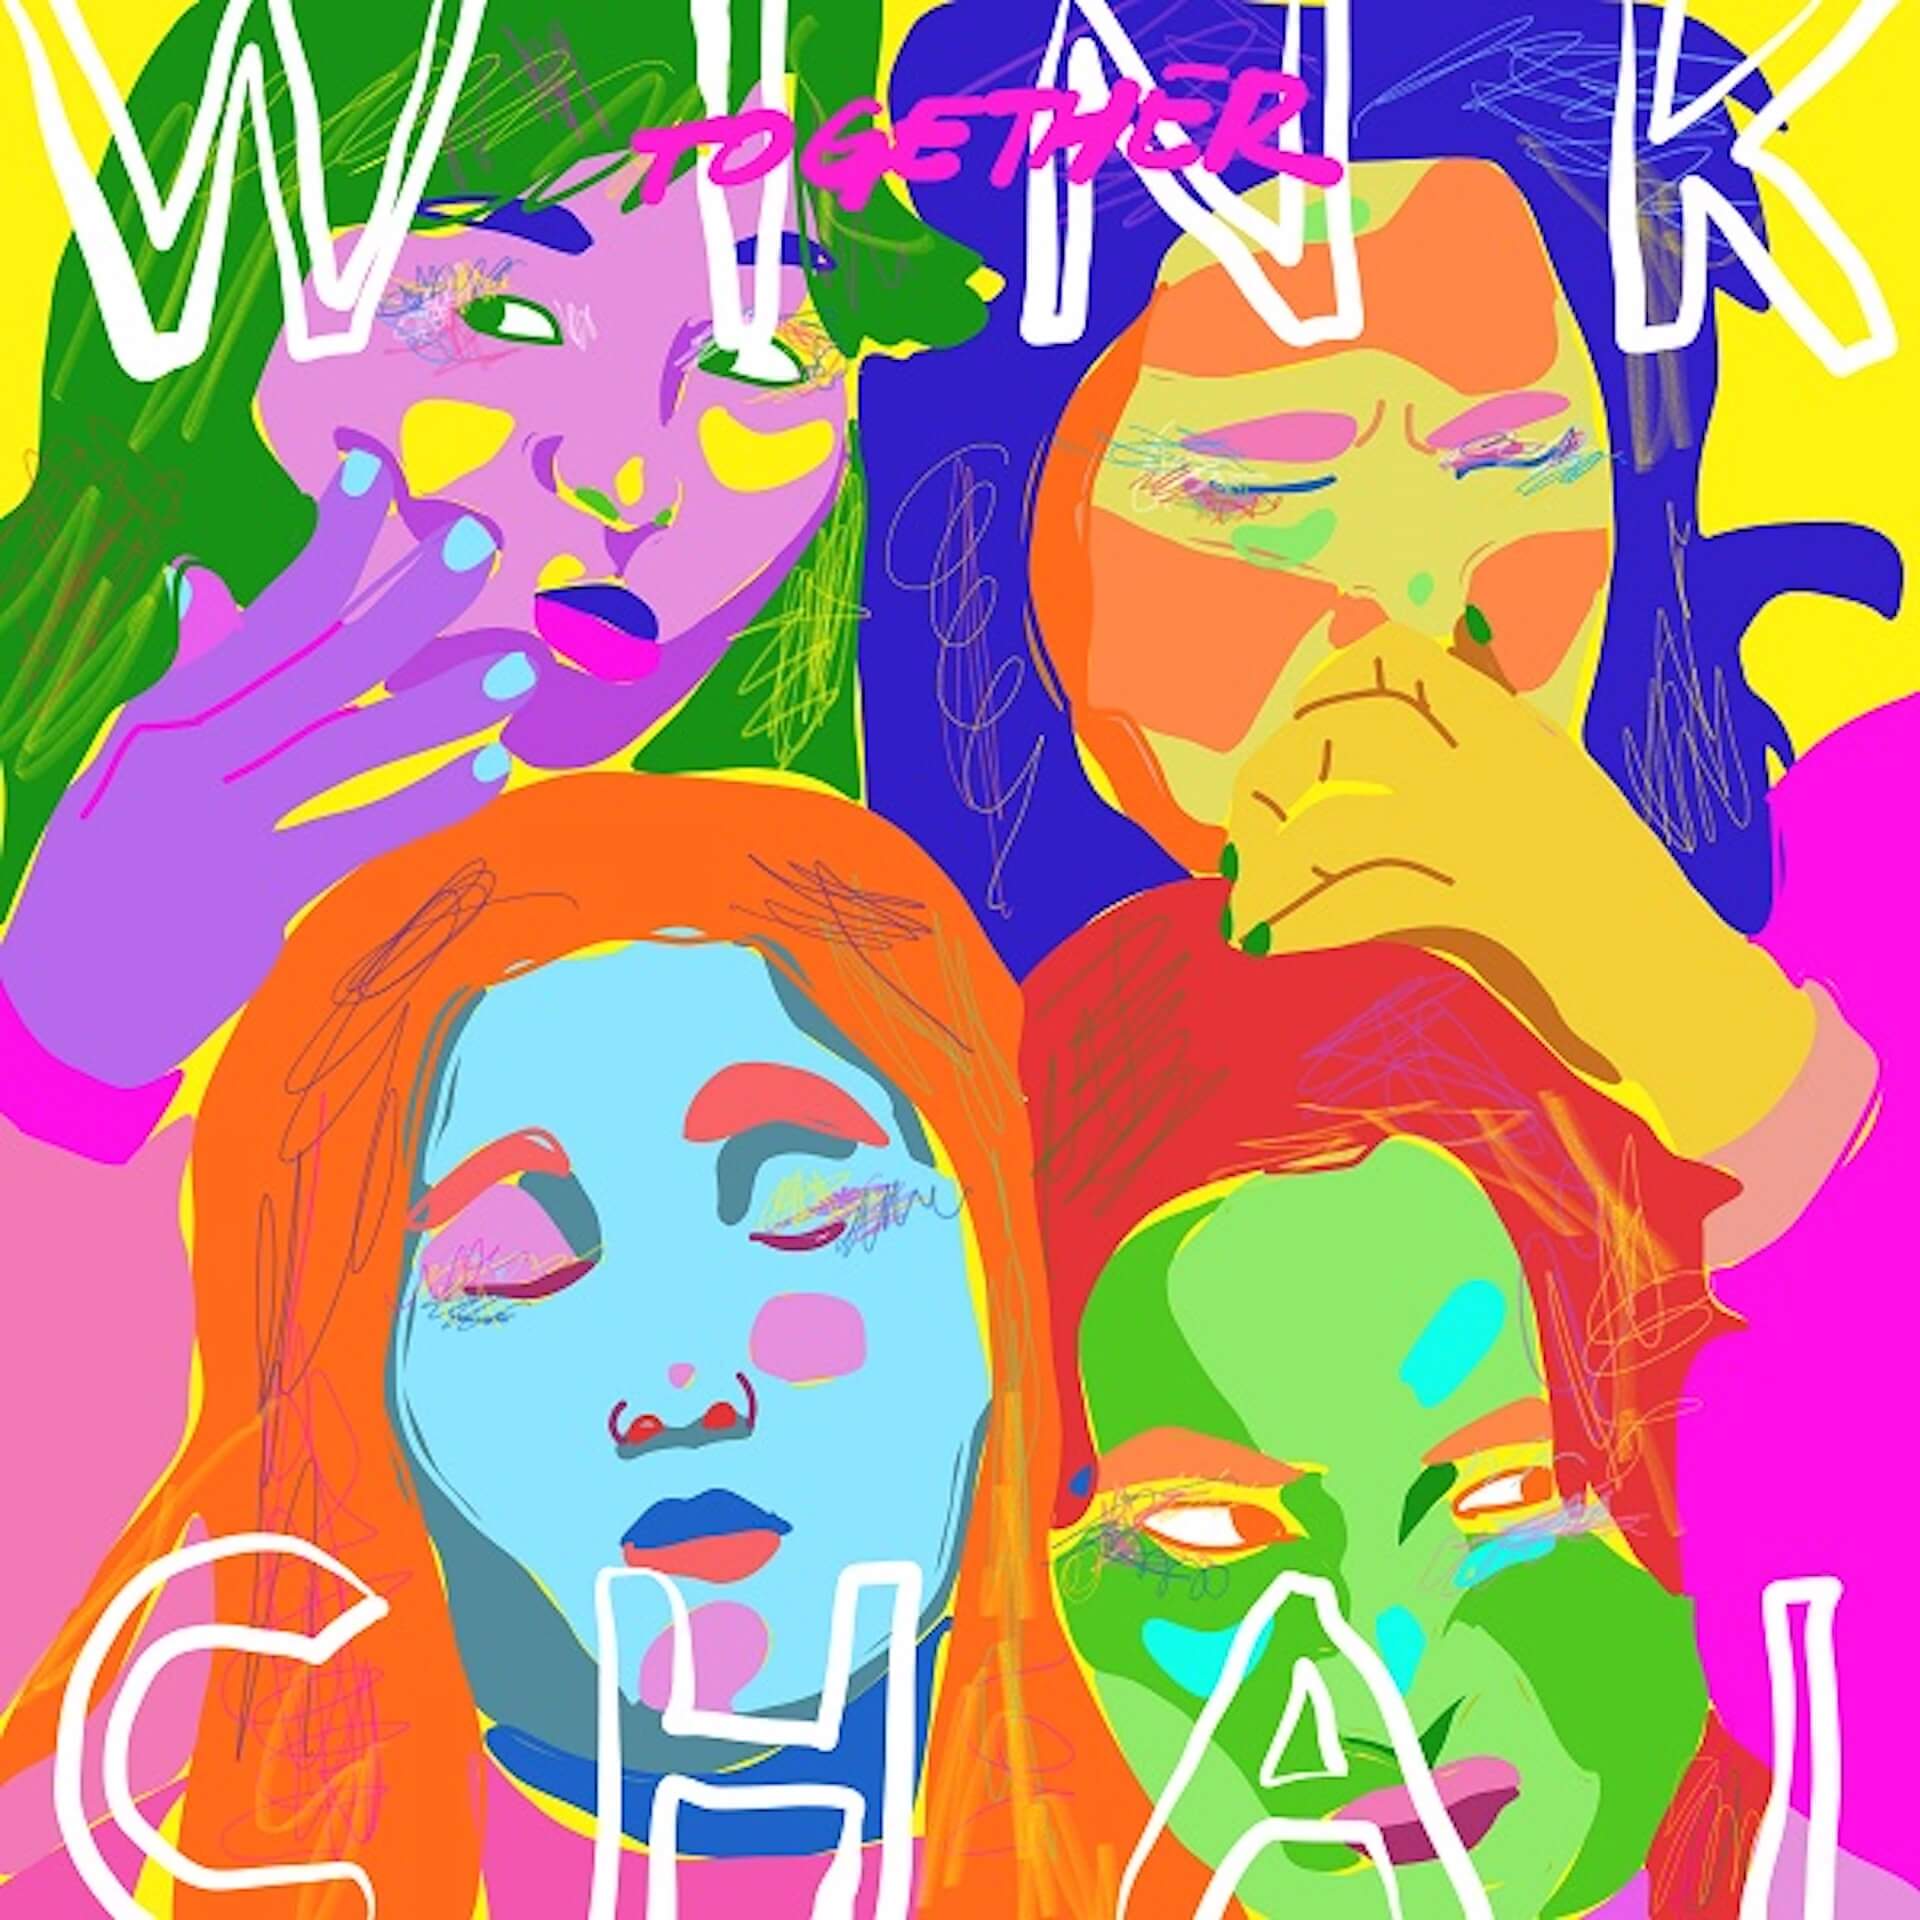 CHAIのリミックスEP『WINK TOGETHER』収録曲“END（Confidence Man Remix）”が本日配信リリース！ music211201_chai_2